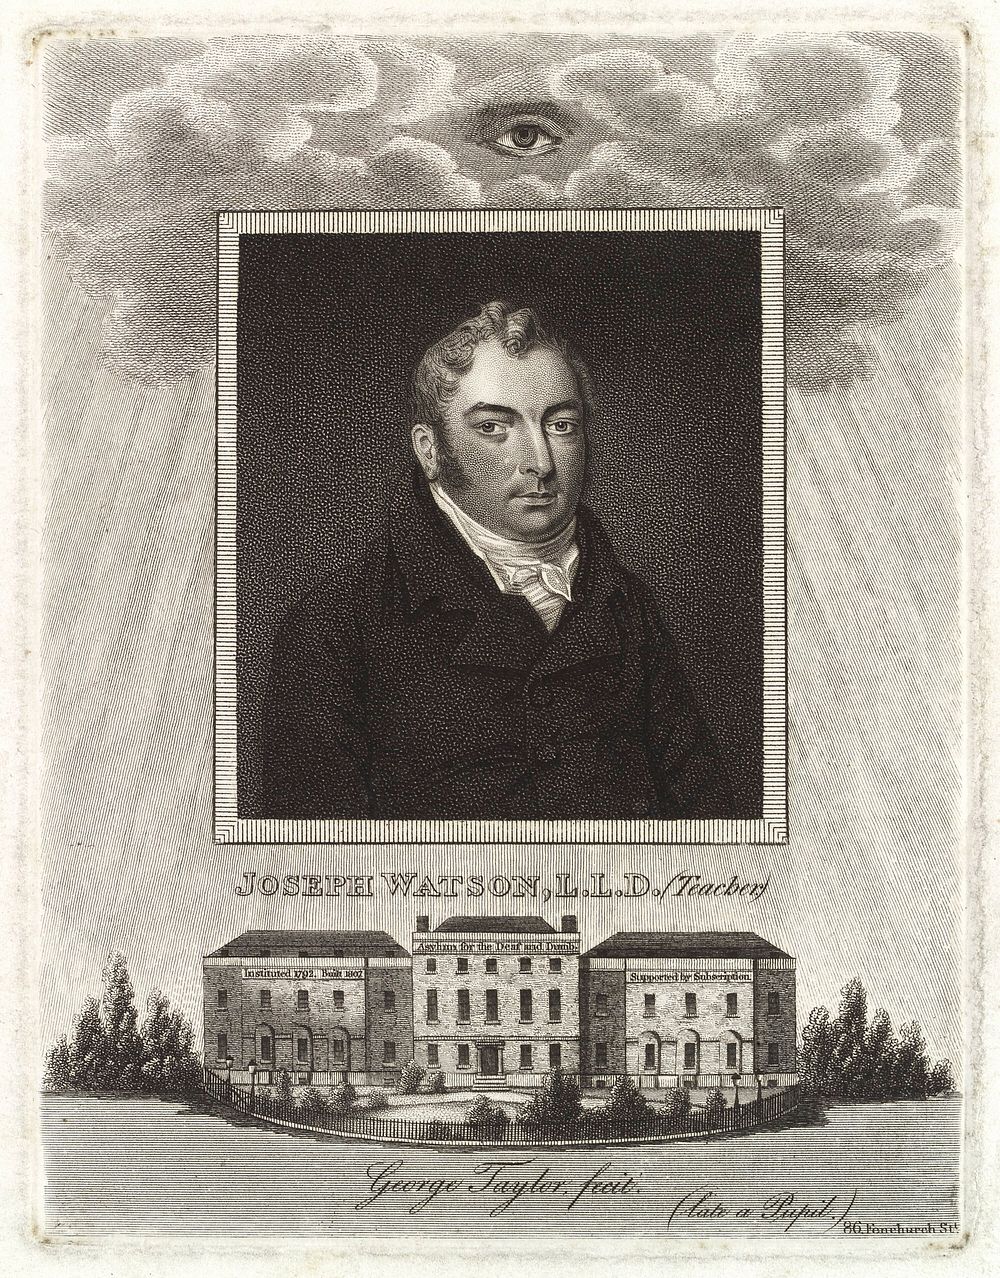 Joseph Watson, and the Asylum for the deaf and dumb, Camberwell, in which he taught. Engraving.